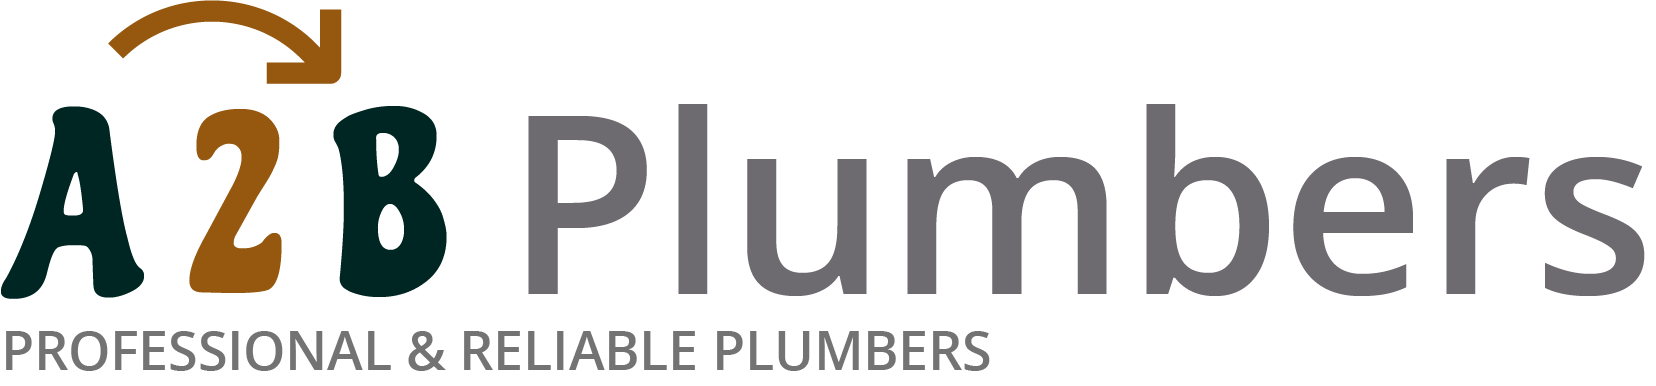 If you need a boiler installed, a radiator repaired or a leaking tap fixed, call us now - we provide services for properties in Burnham On Sea and the local area.